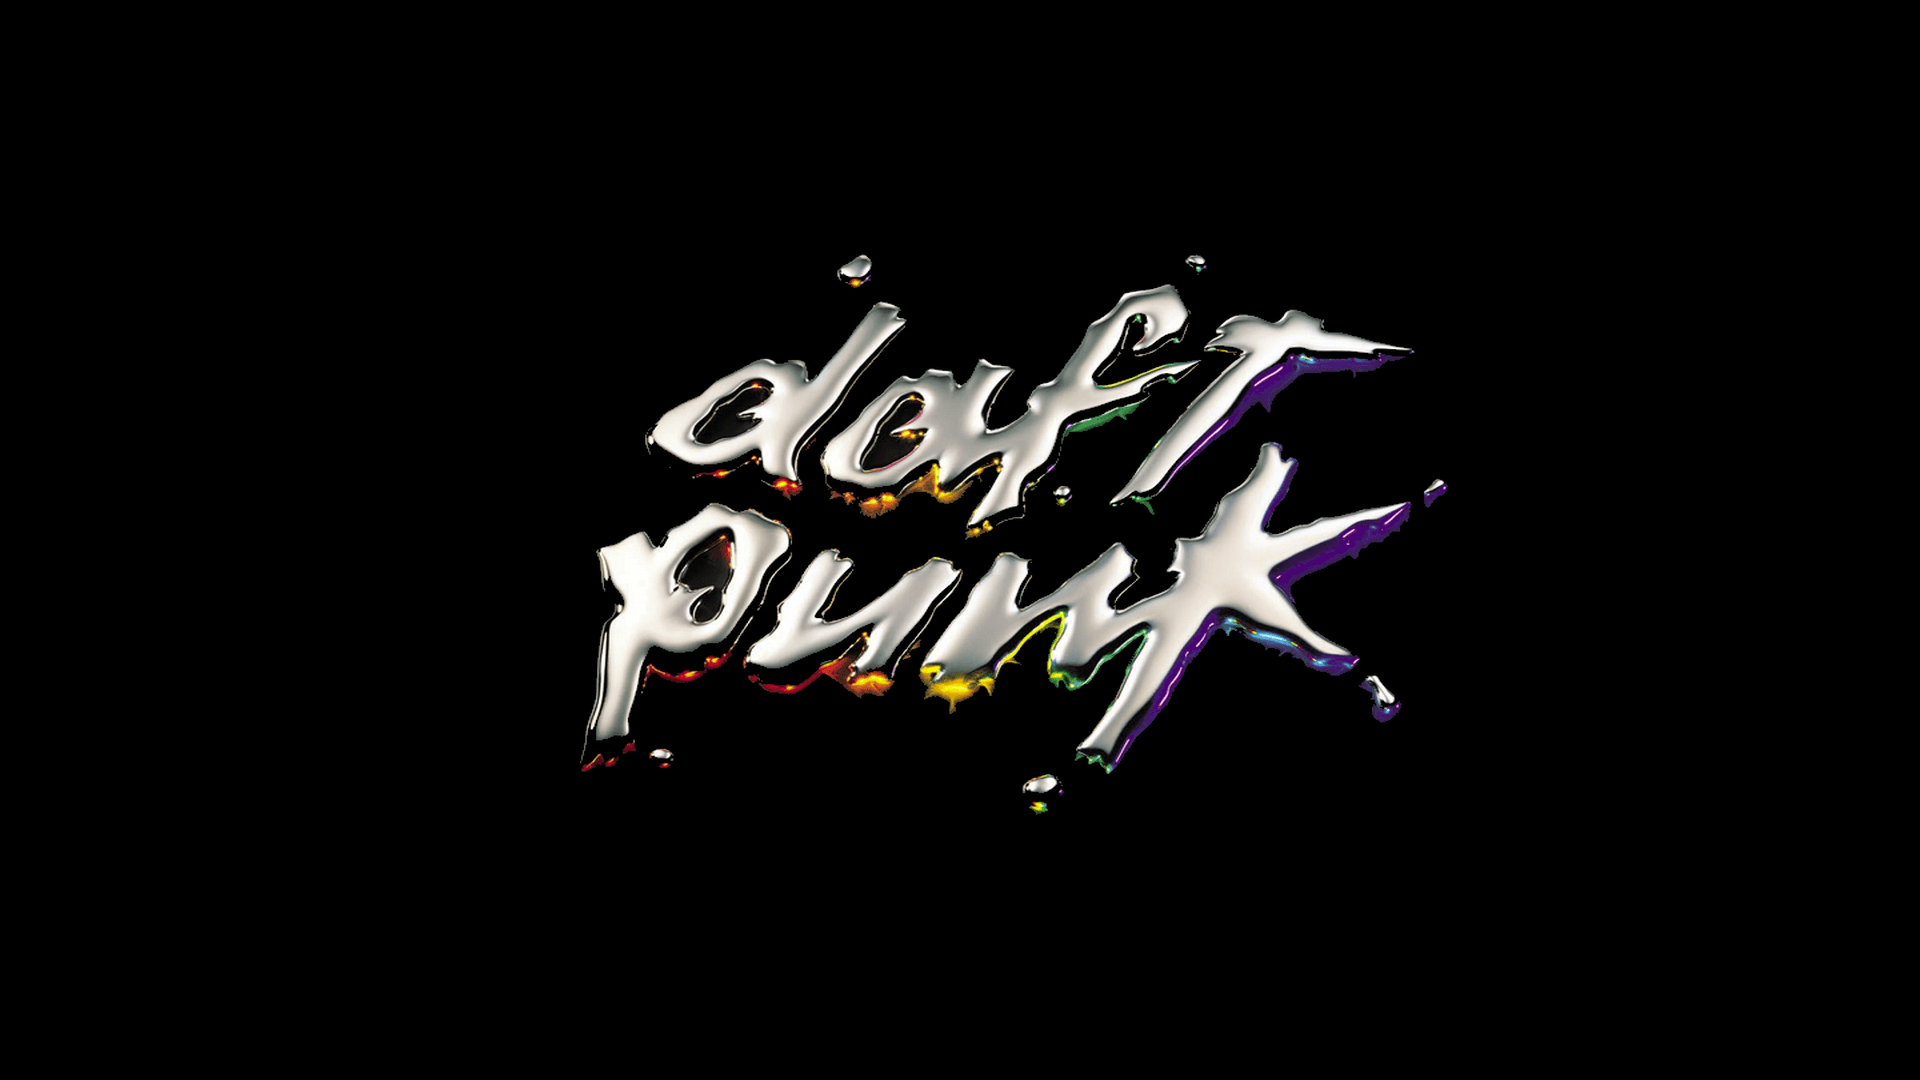 daft punk hdtv wallpapers and Popular Wallpapers 6204